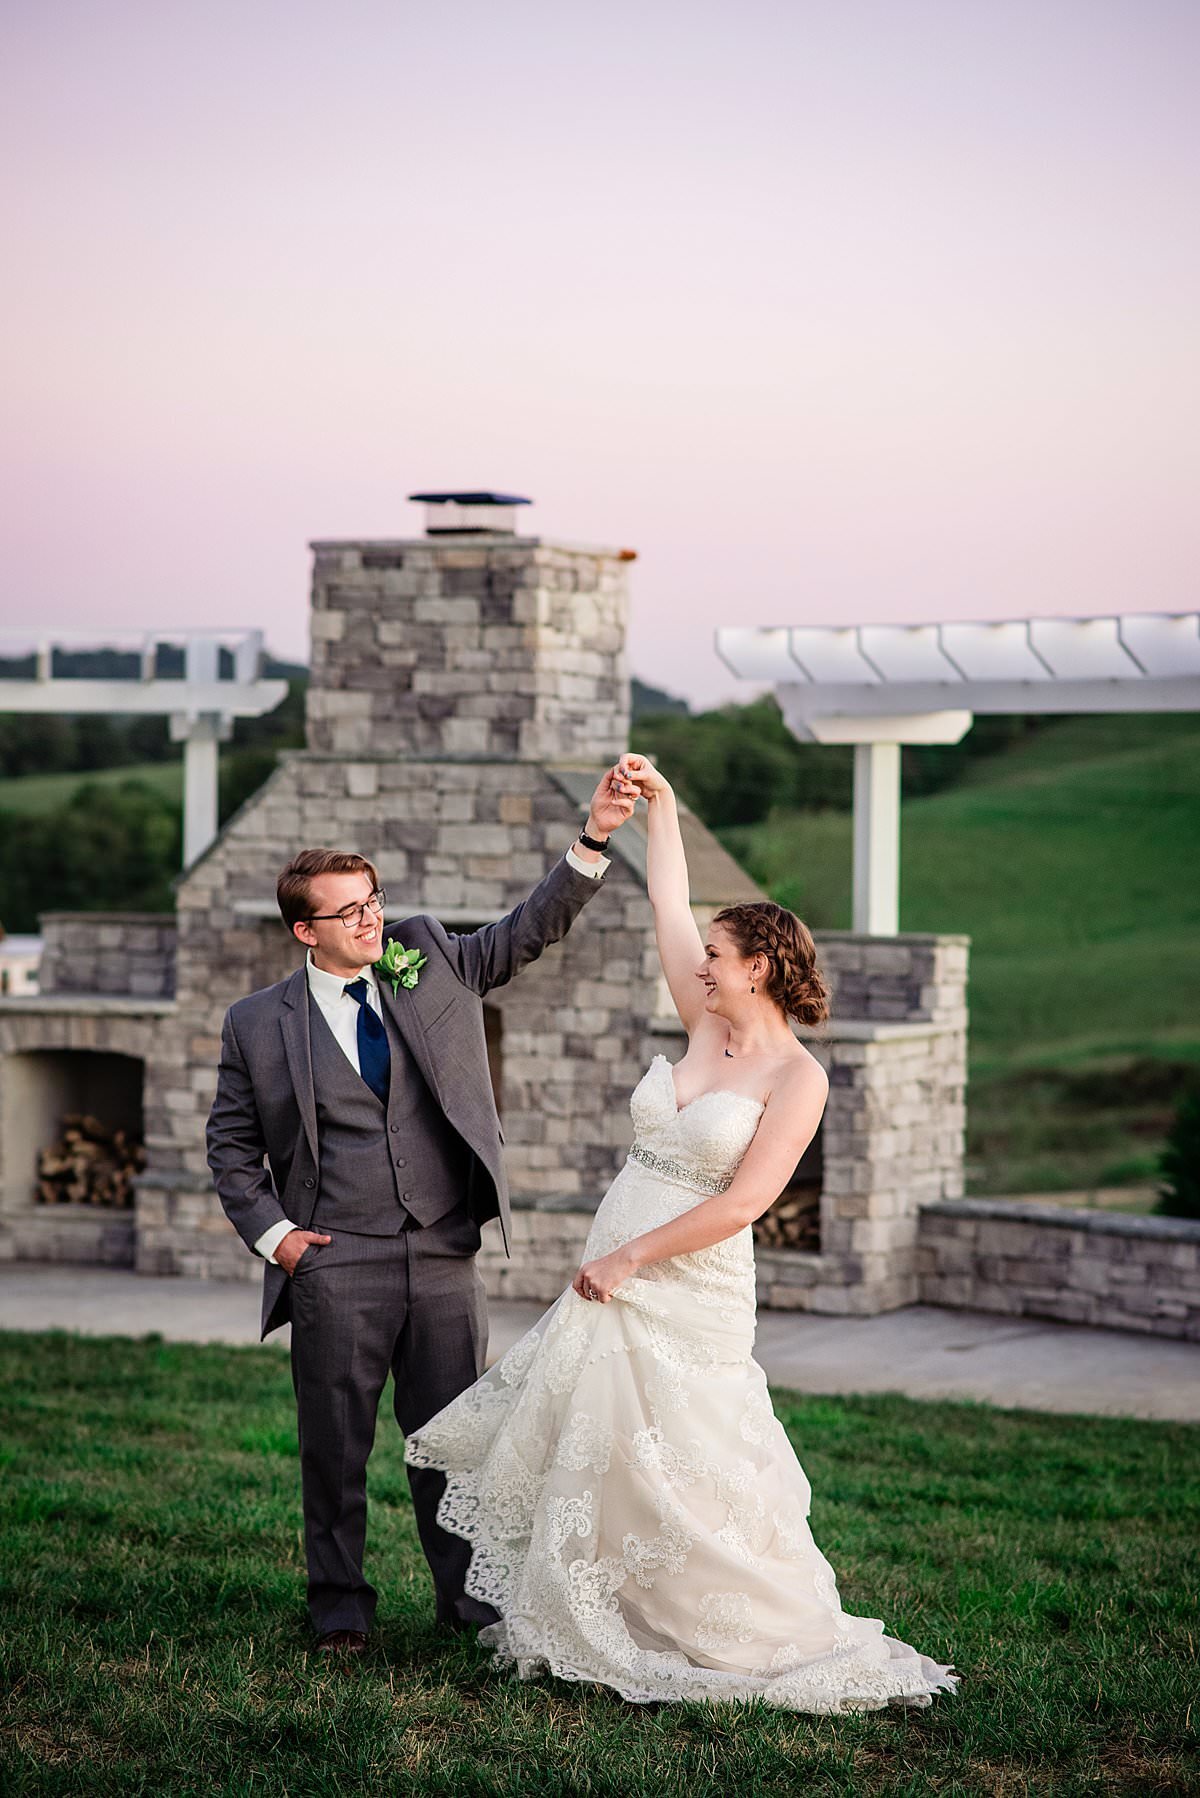 Groom helping his wife twirl in her wedding dress atop a hillside at White Dove Barn with a lage outdoor fireplace behind them